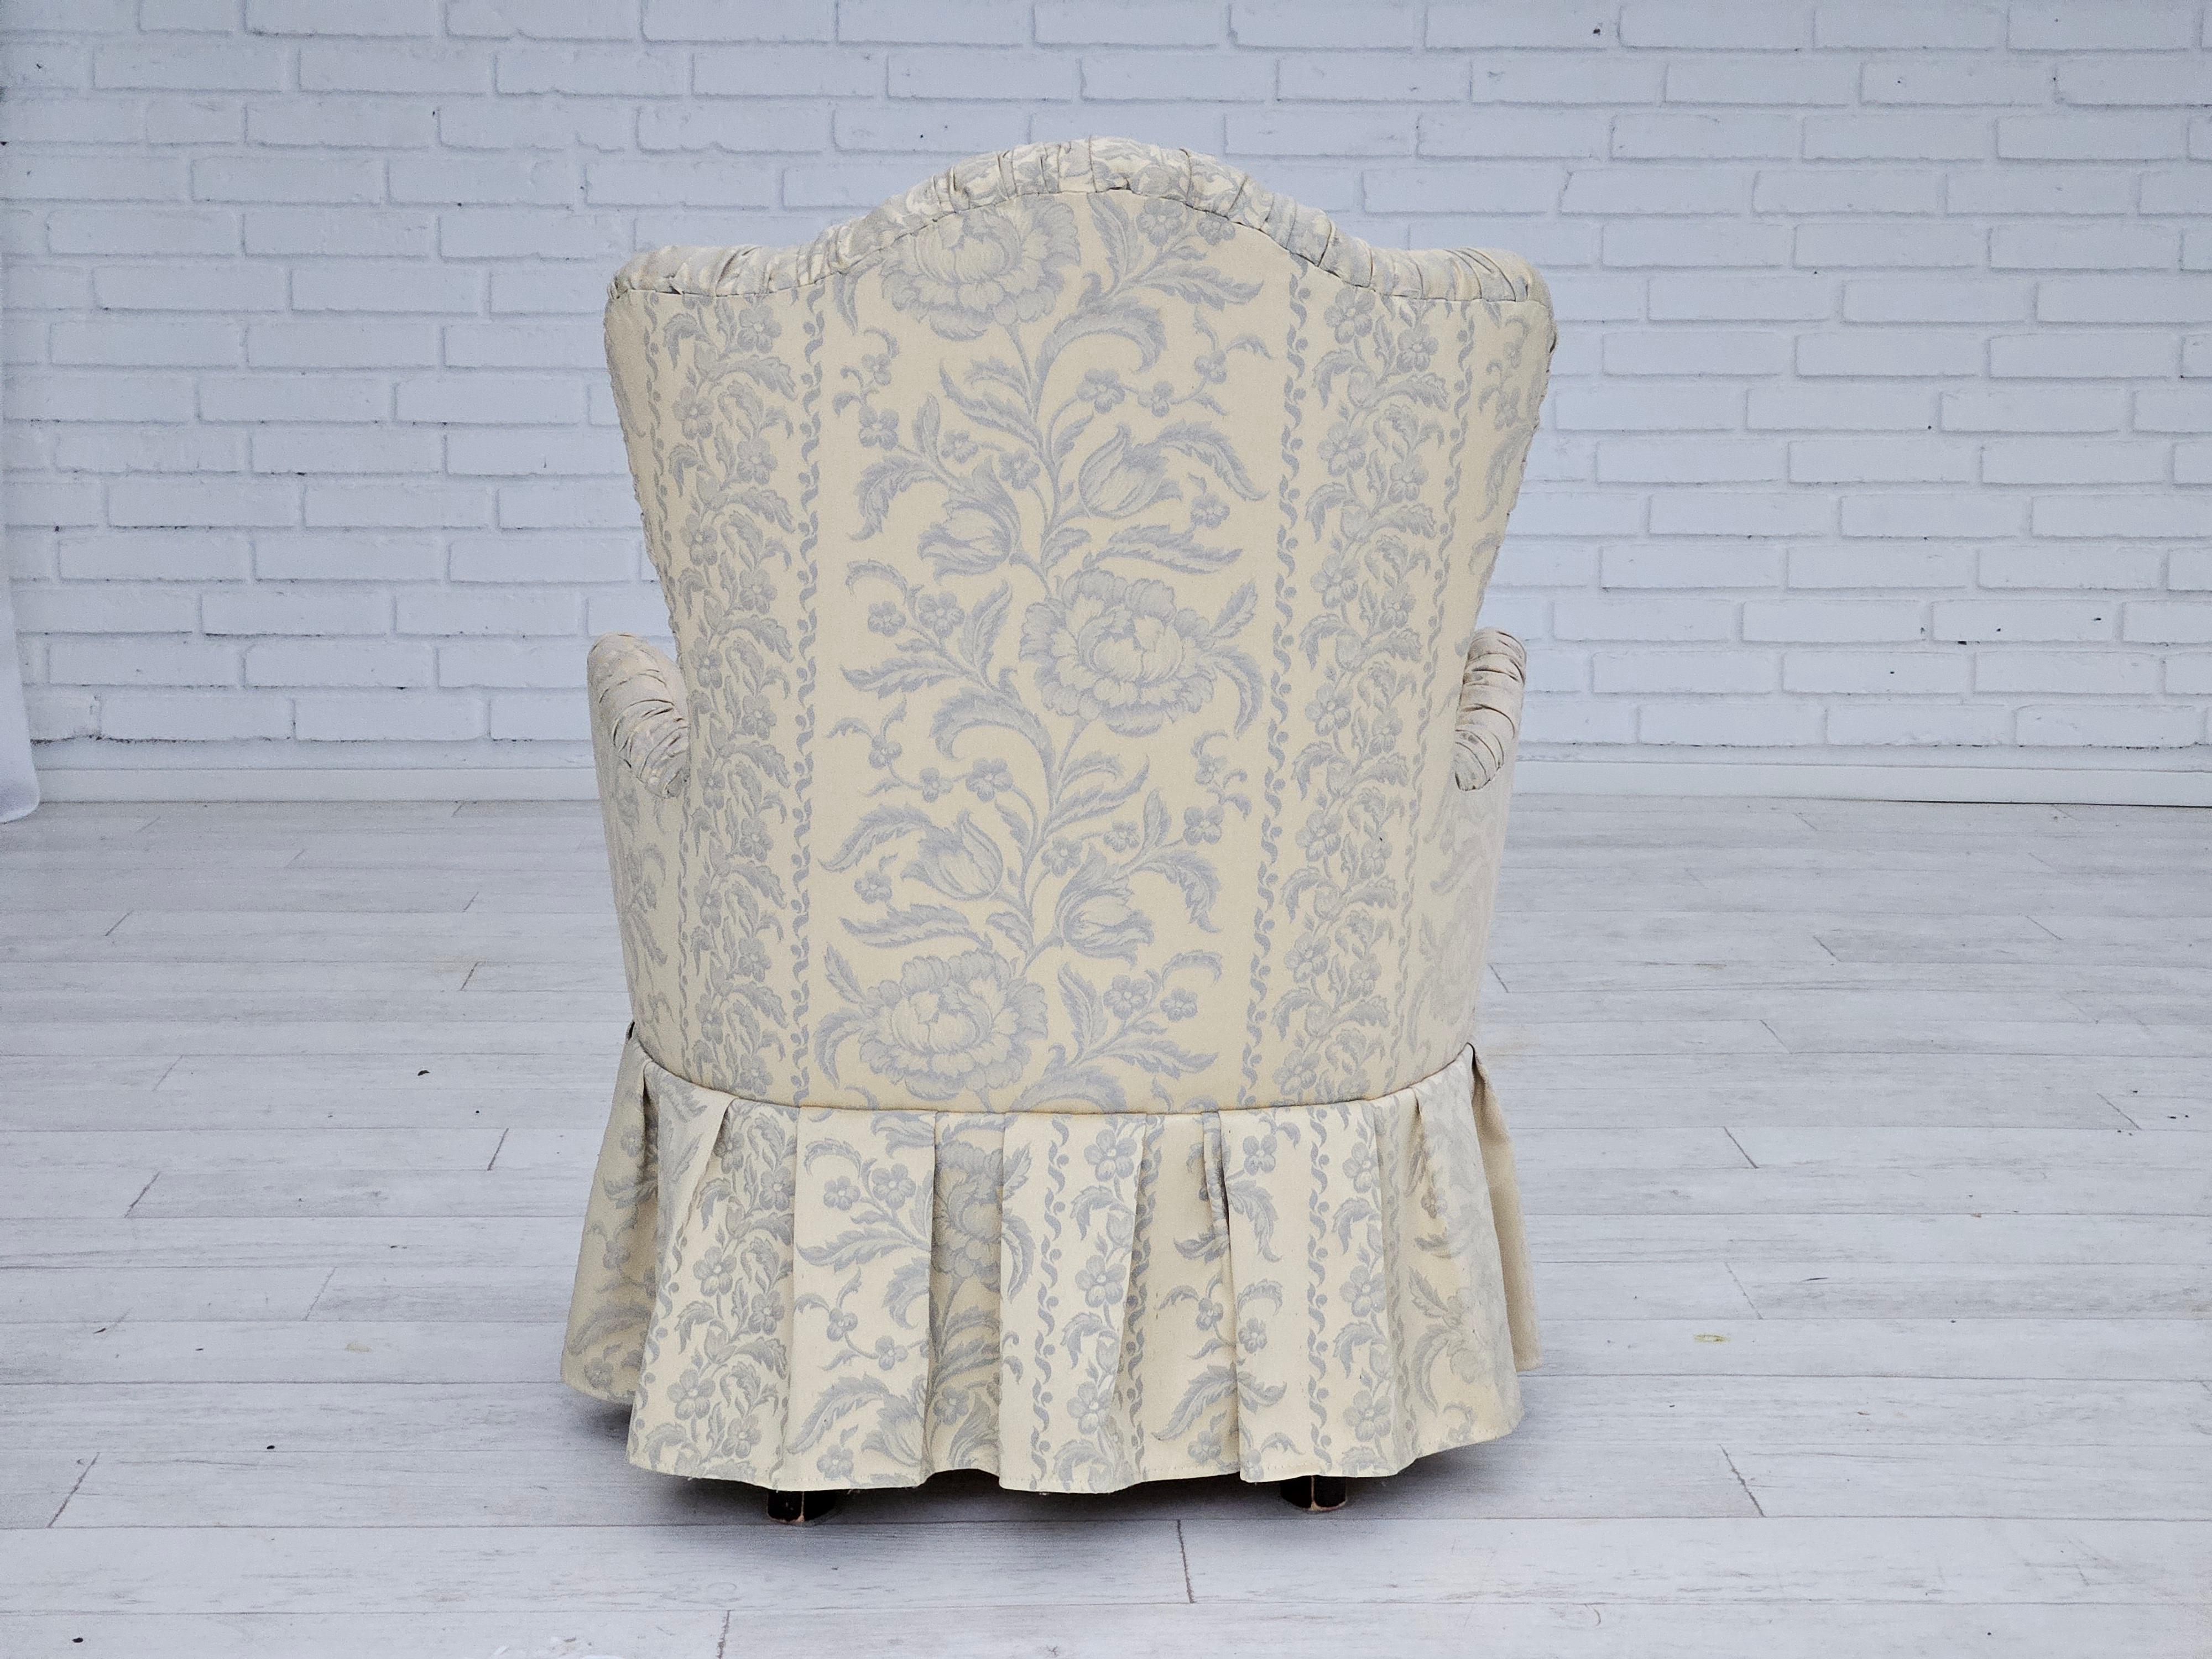 1950s, fauteuil Whiting, reupholstered, creamy/white floral fabric. en vente 3